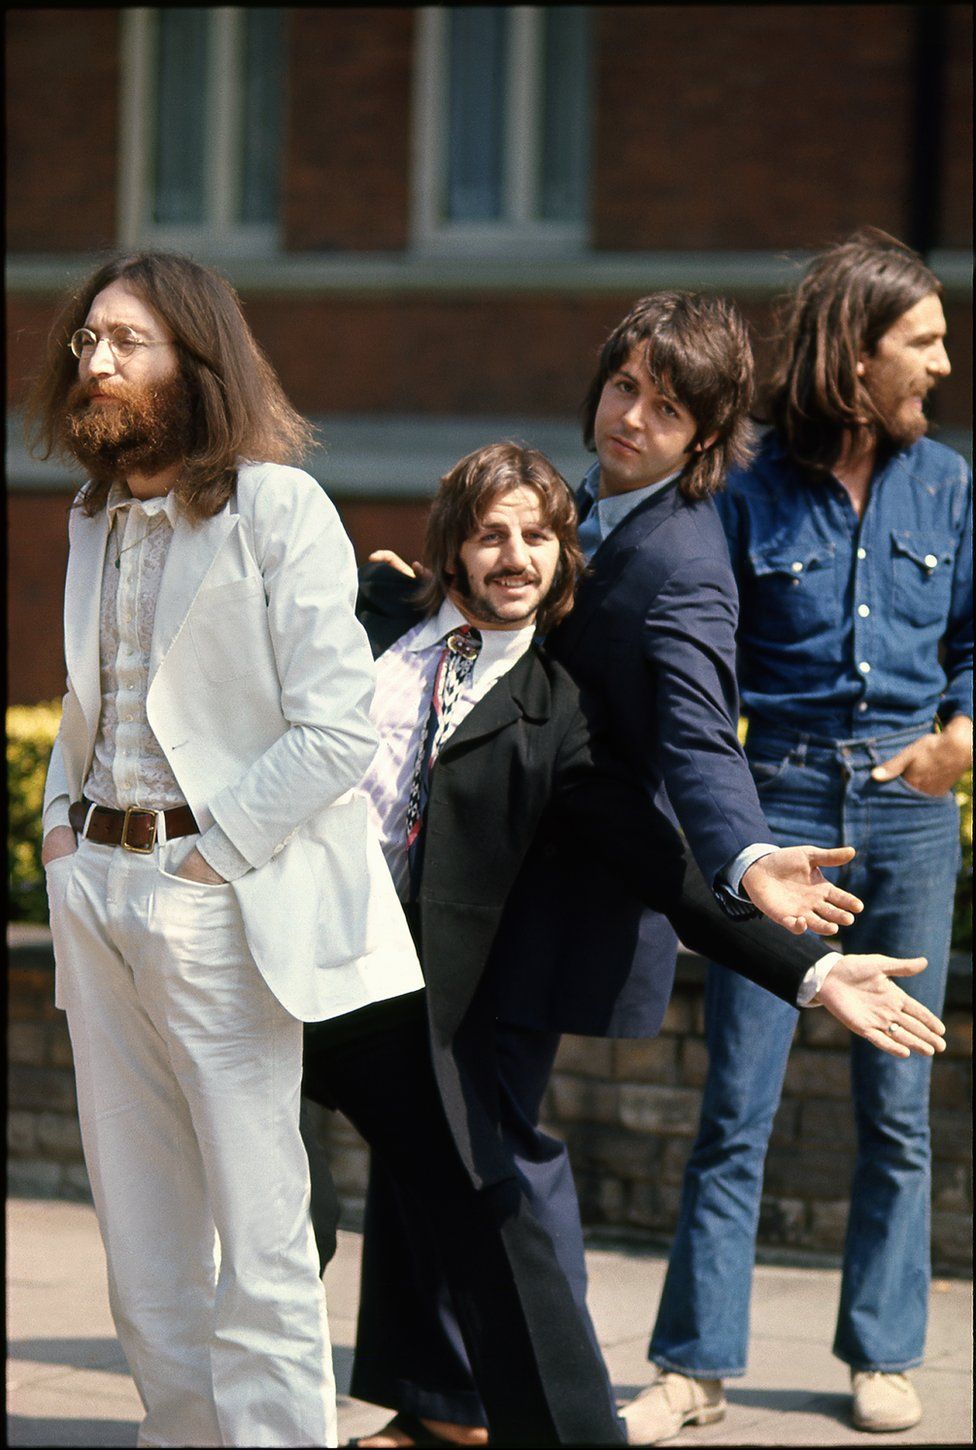 The Beatles at Abbey Road in 1969